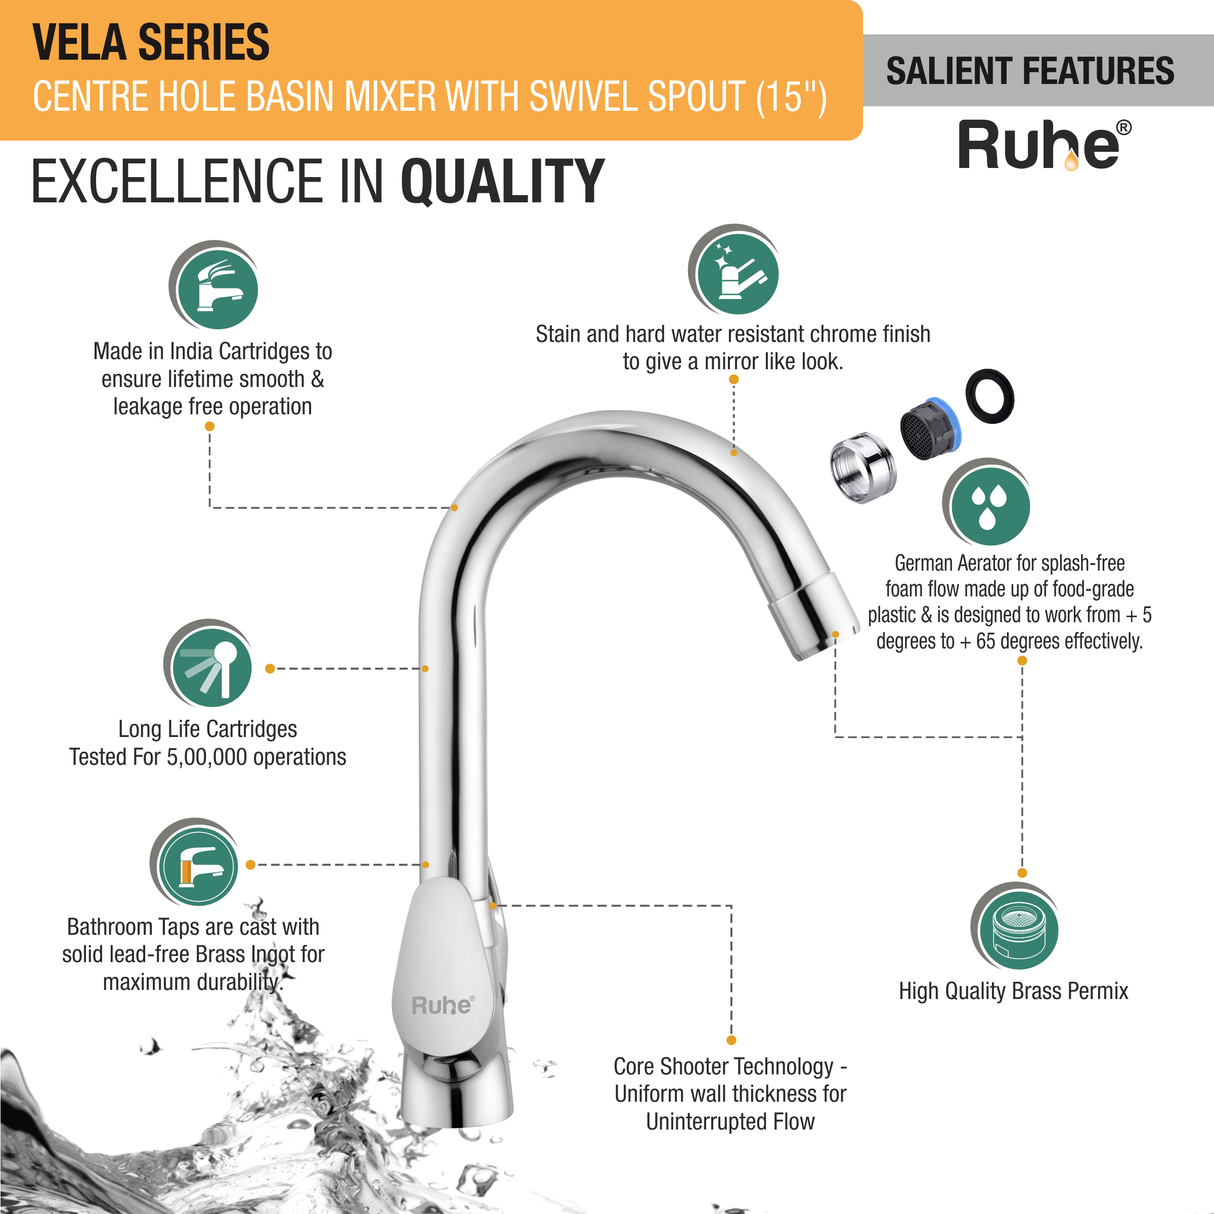 Vela Centre Hole Basin Mixer with Medium (15 inches) Round Swivel Spout Faucet features